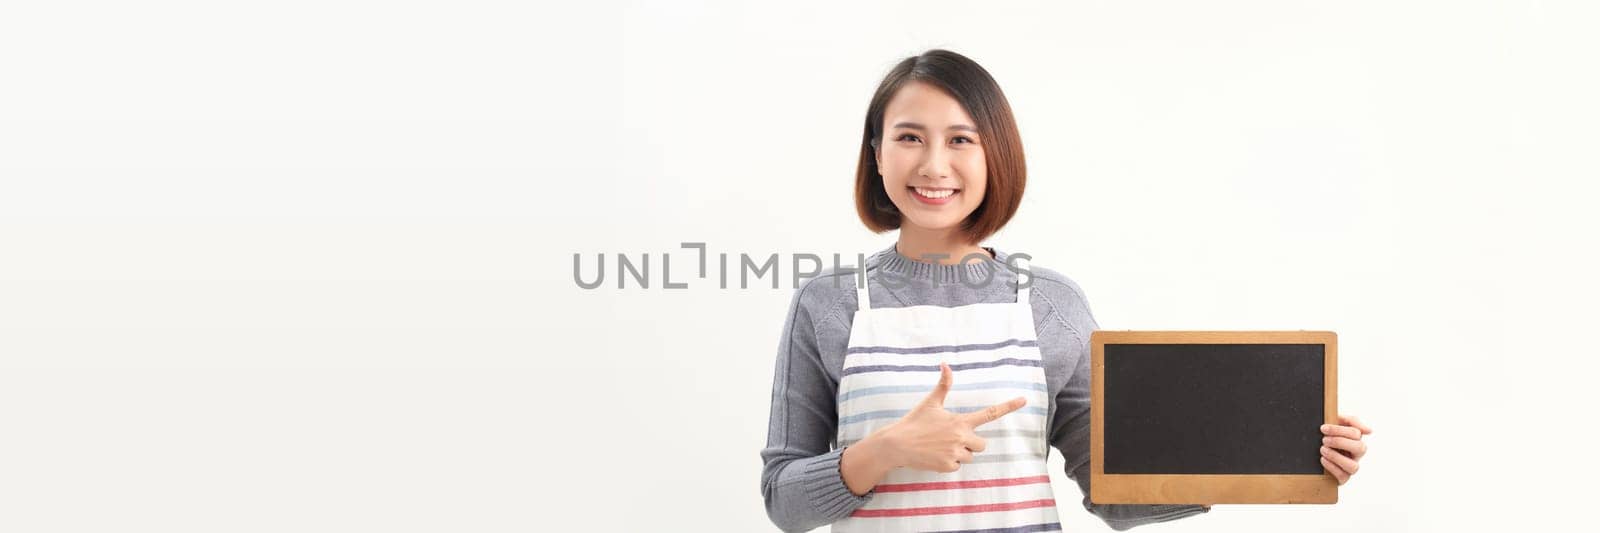 Waitress holding at empty board and looking at camera while standing on white banner background.